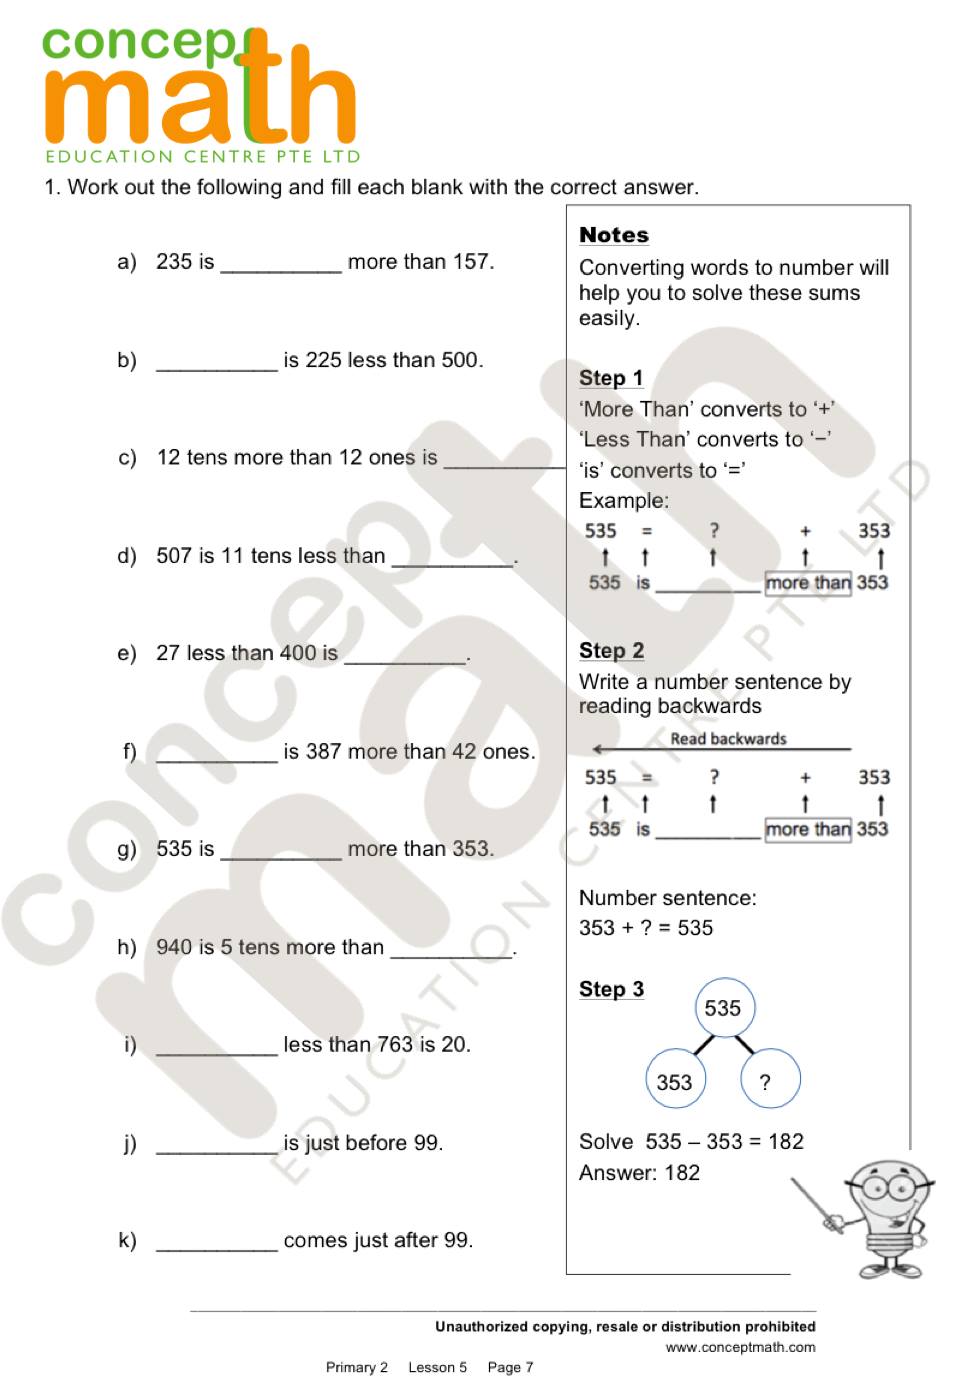 Primary Mathematics Worksheet The Best Worksheets Image Collection